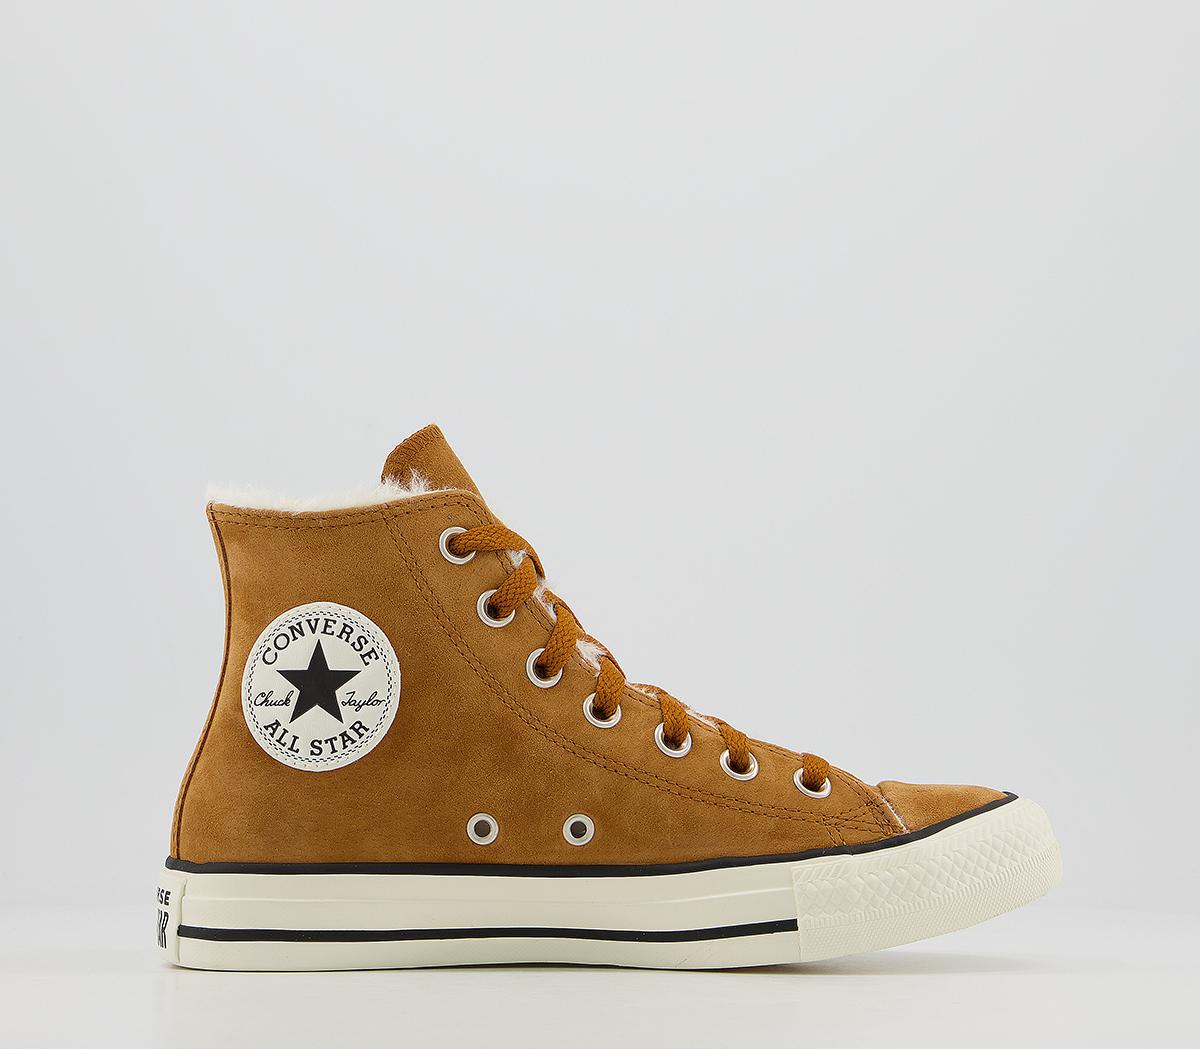 Converse Converse All Star Hi Trainers Burnt Sienna Shearling Exclusive -  Unisex Sports